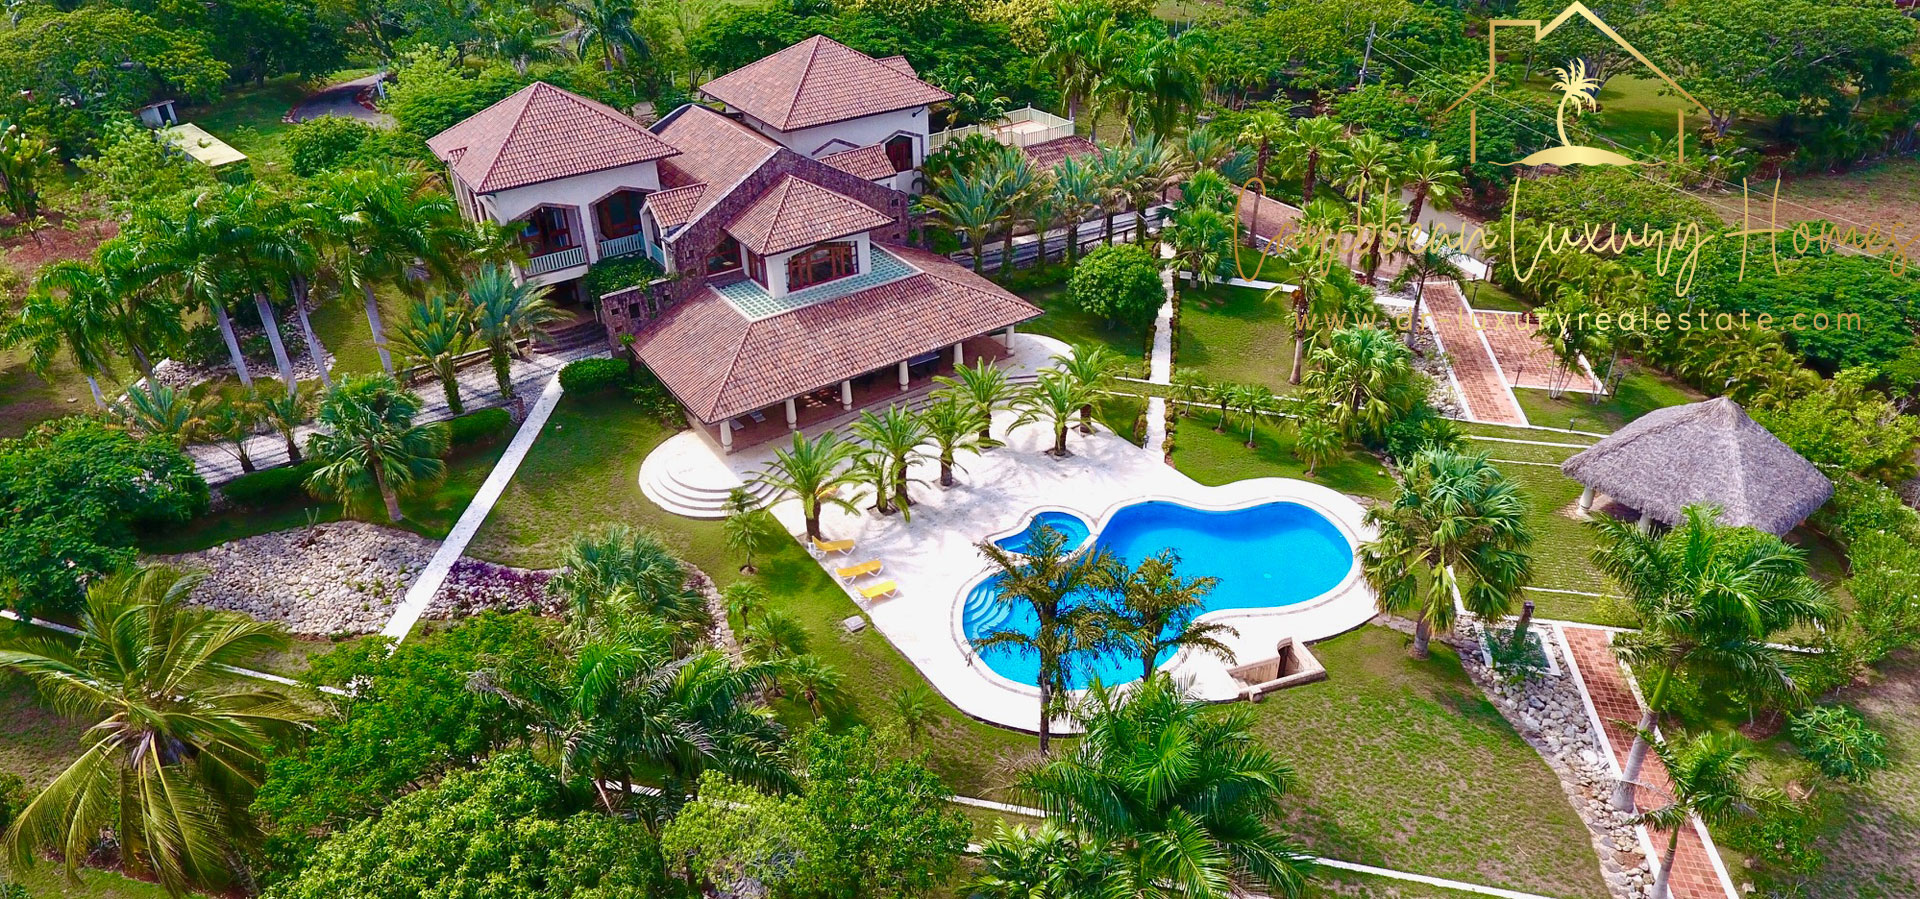 #0 Luxury mansion with magnificent tropical garden